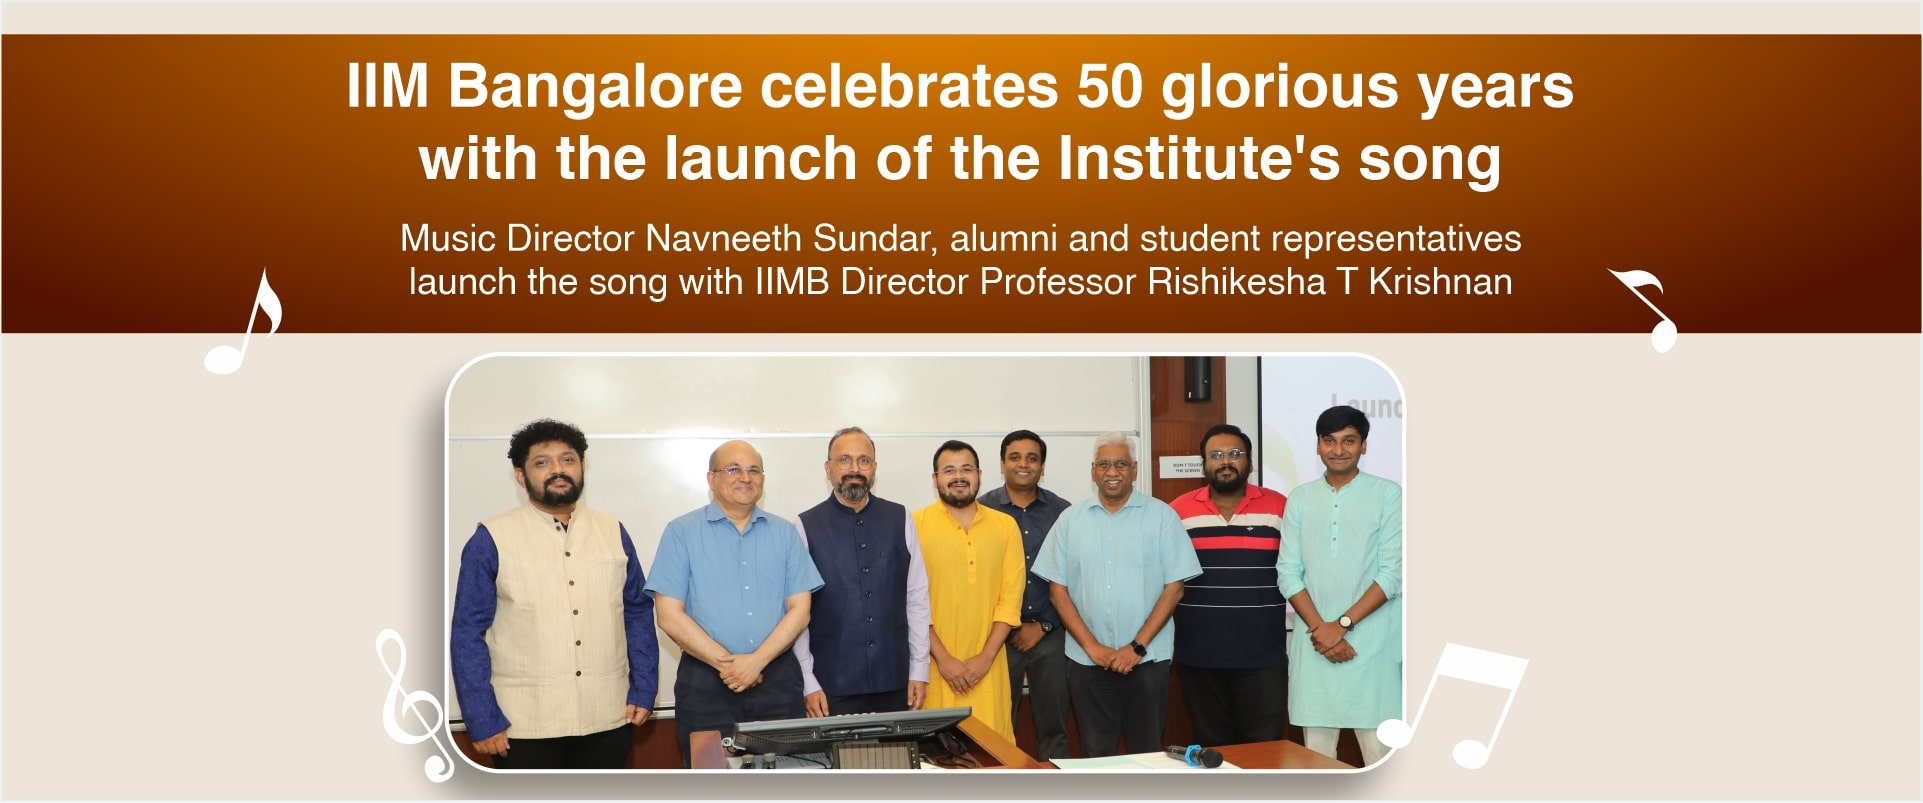 IIM Bangalore celebrates 50 glorious years with the launch of the Institute’s song